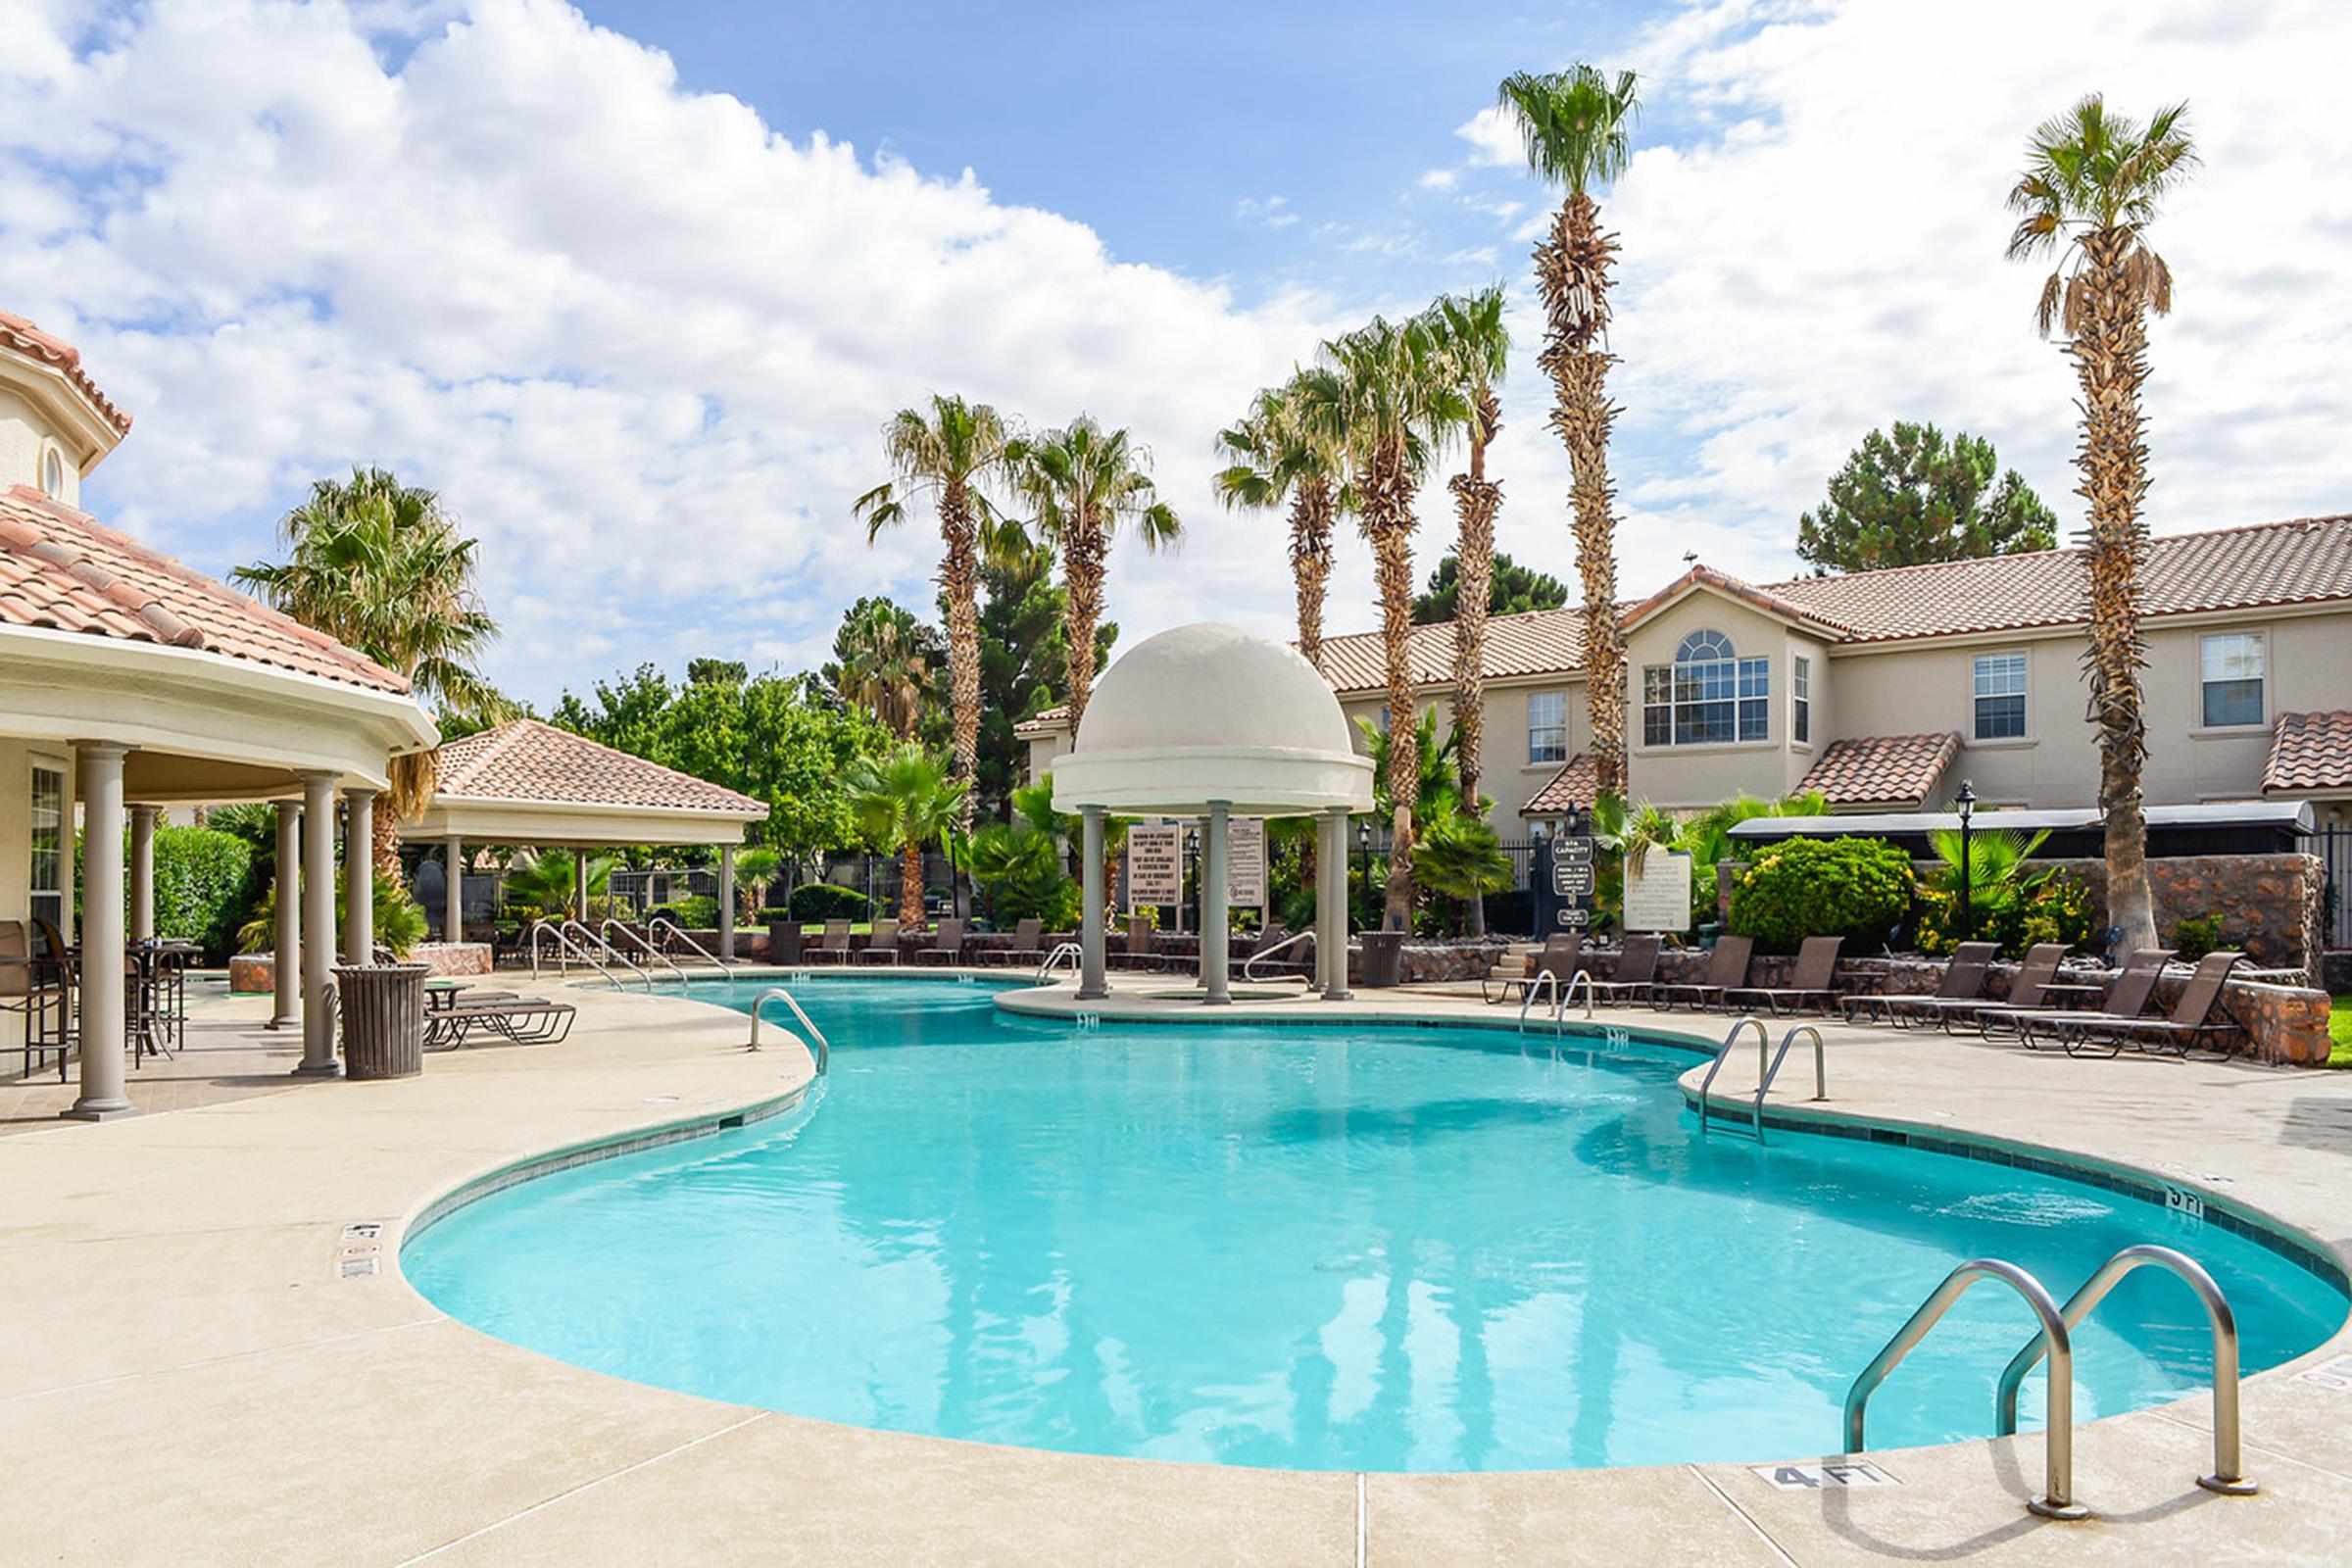 RELAX BESIDE OUR RESORT-STYLE POOL IN EL PASO, TEXAS